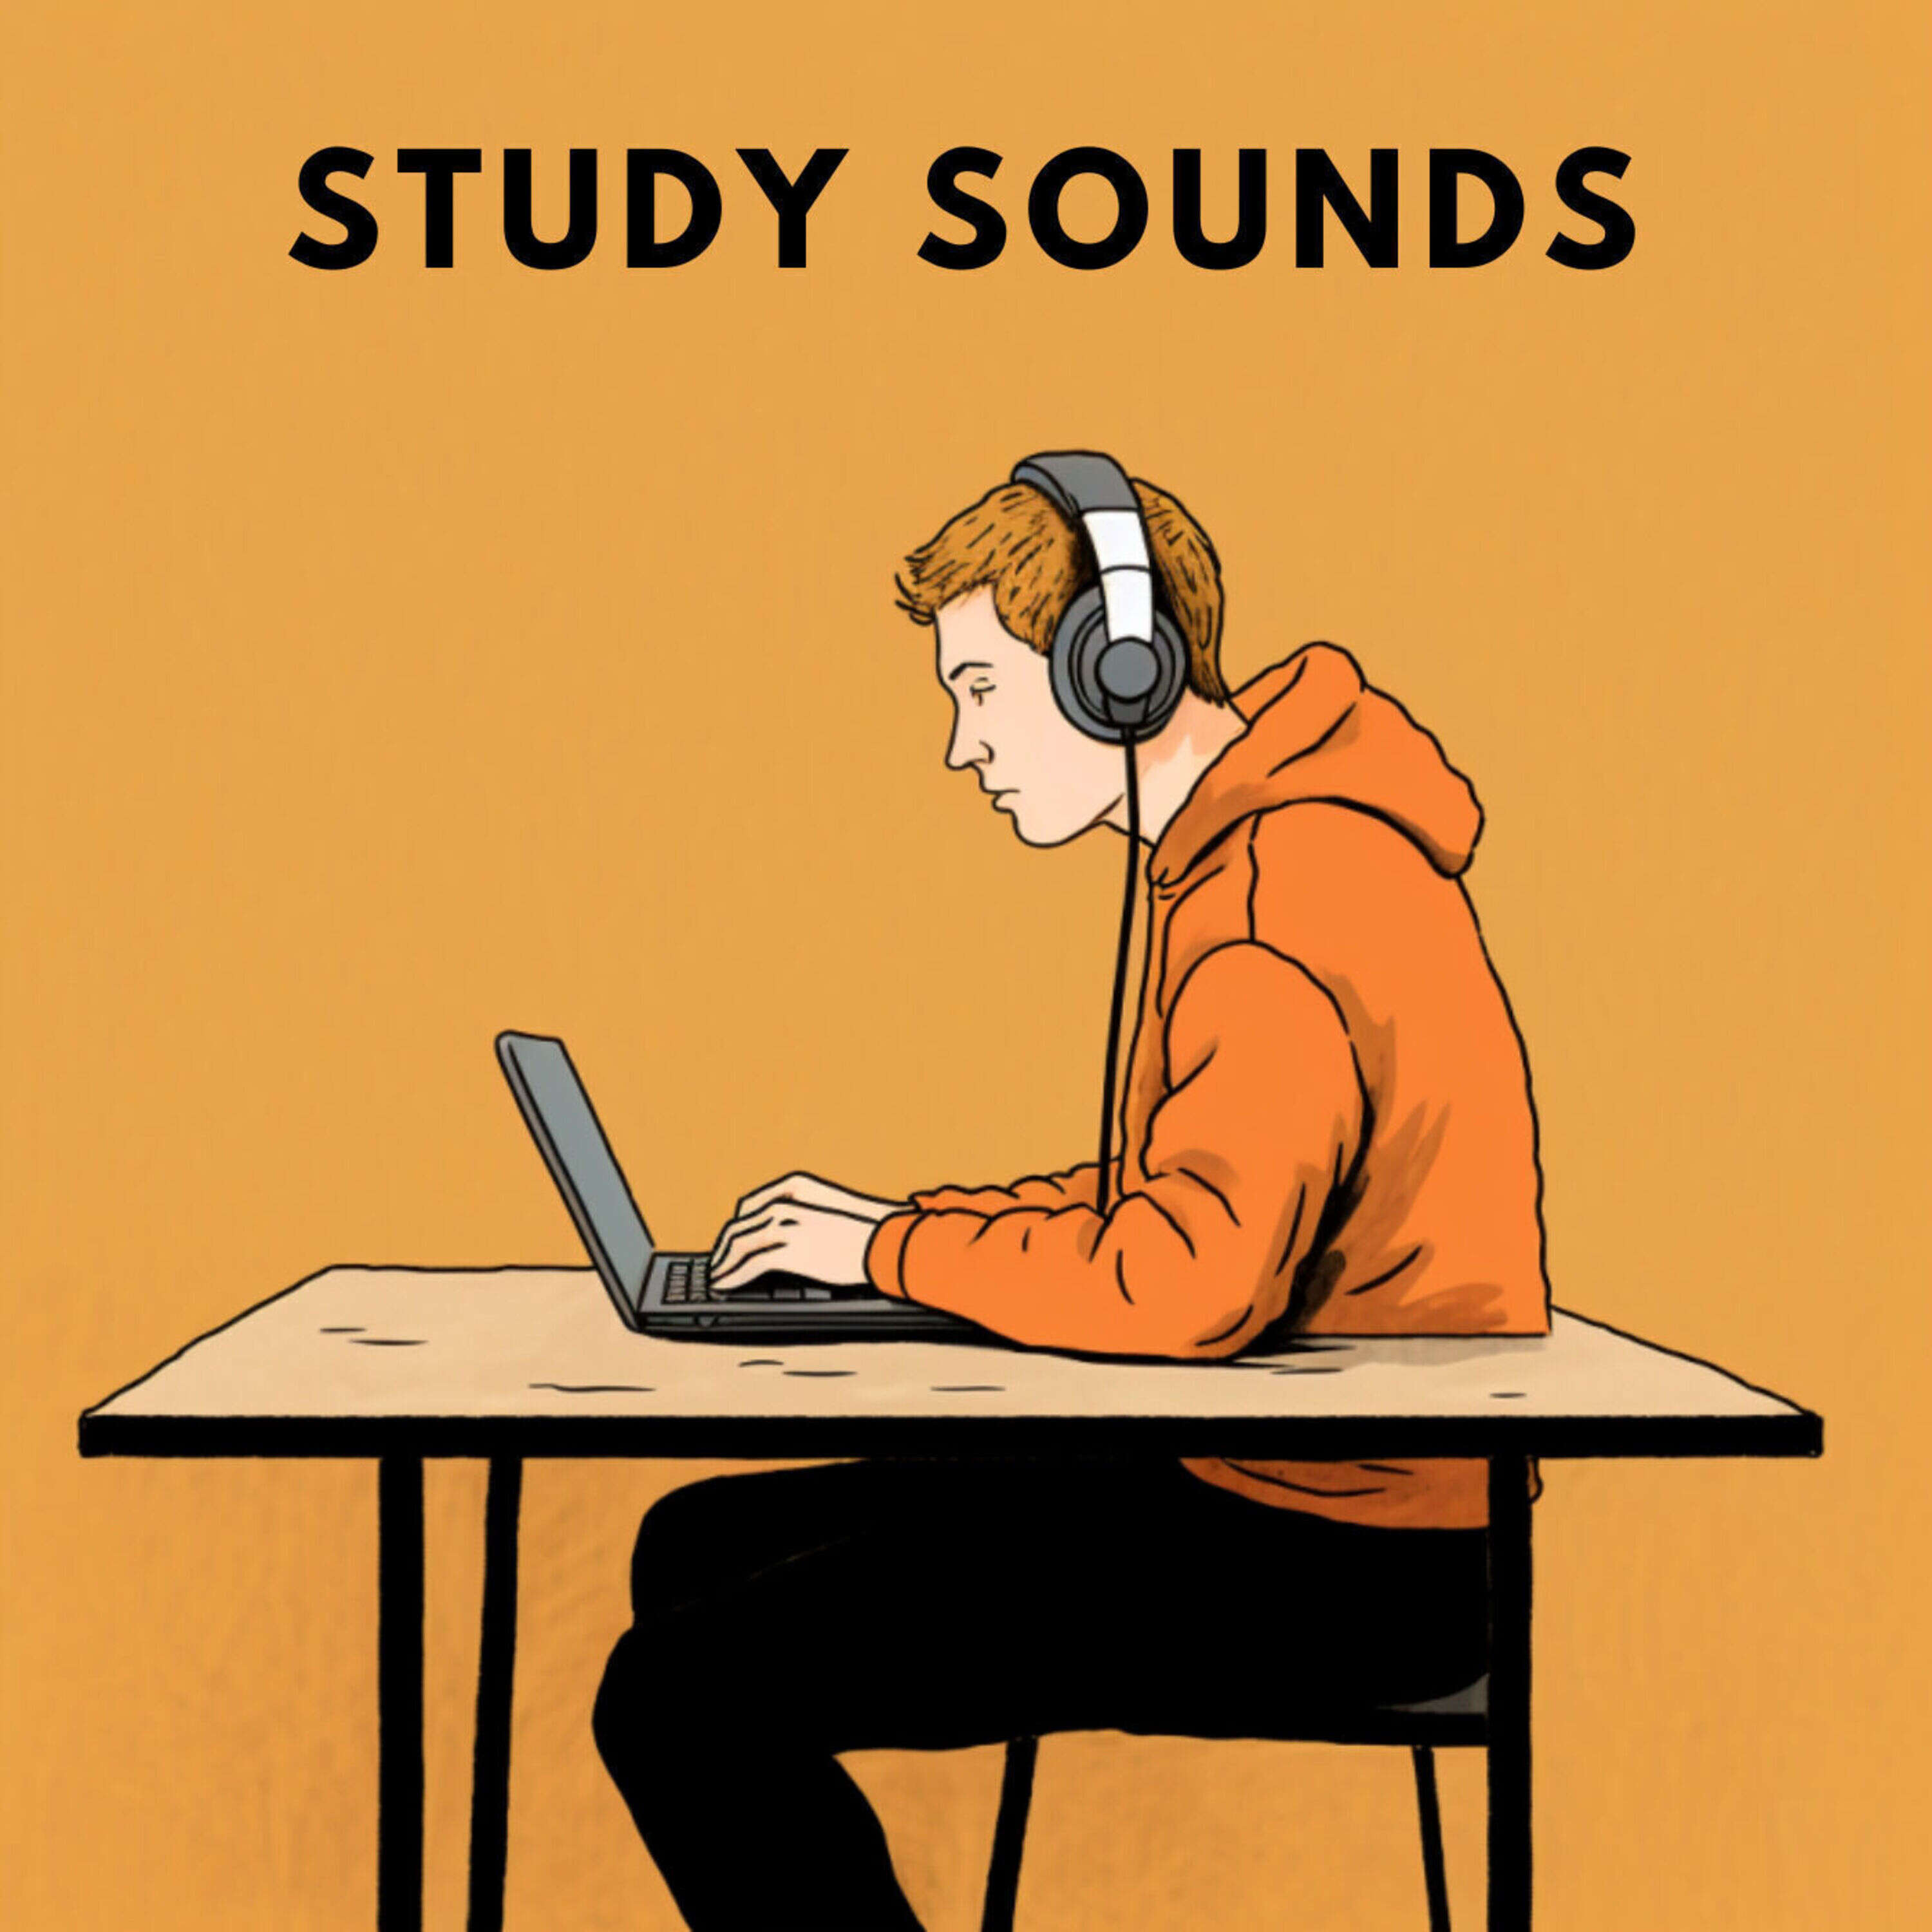 Study sounds Project - Crystal Rose (sounds for Studying)